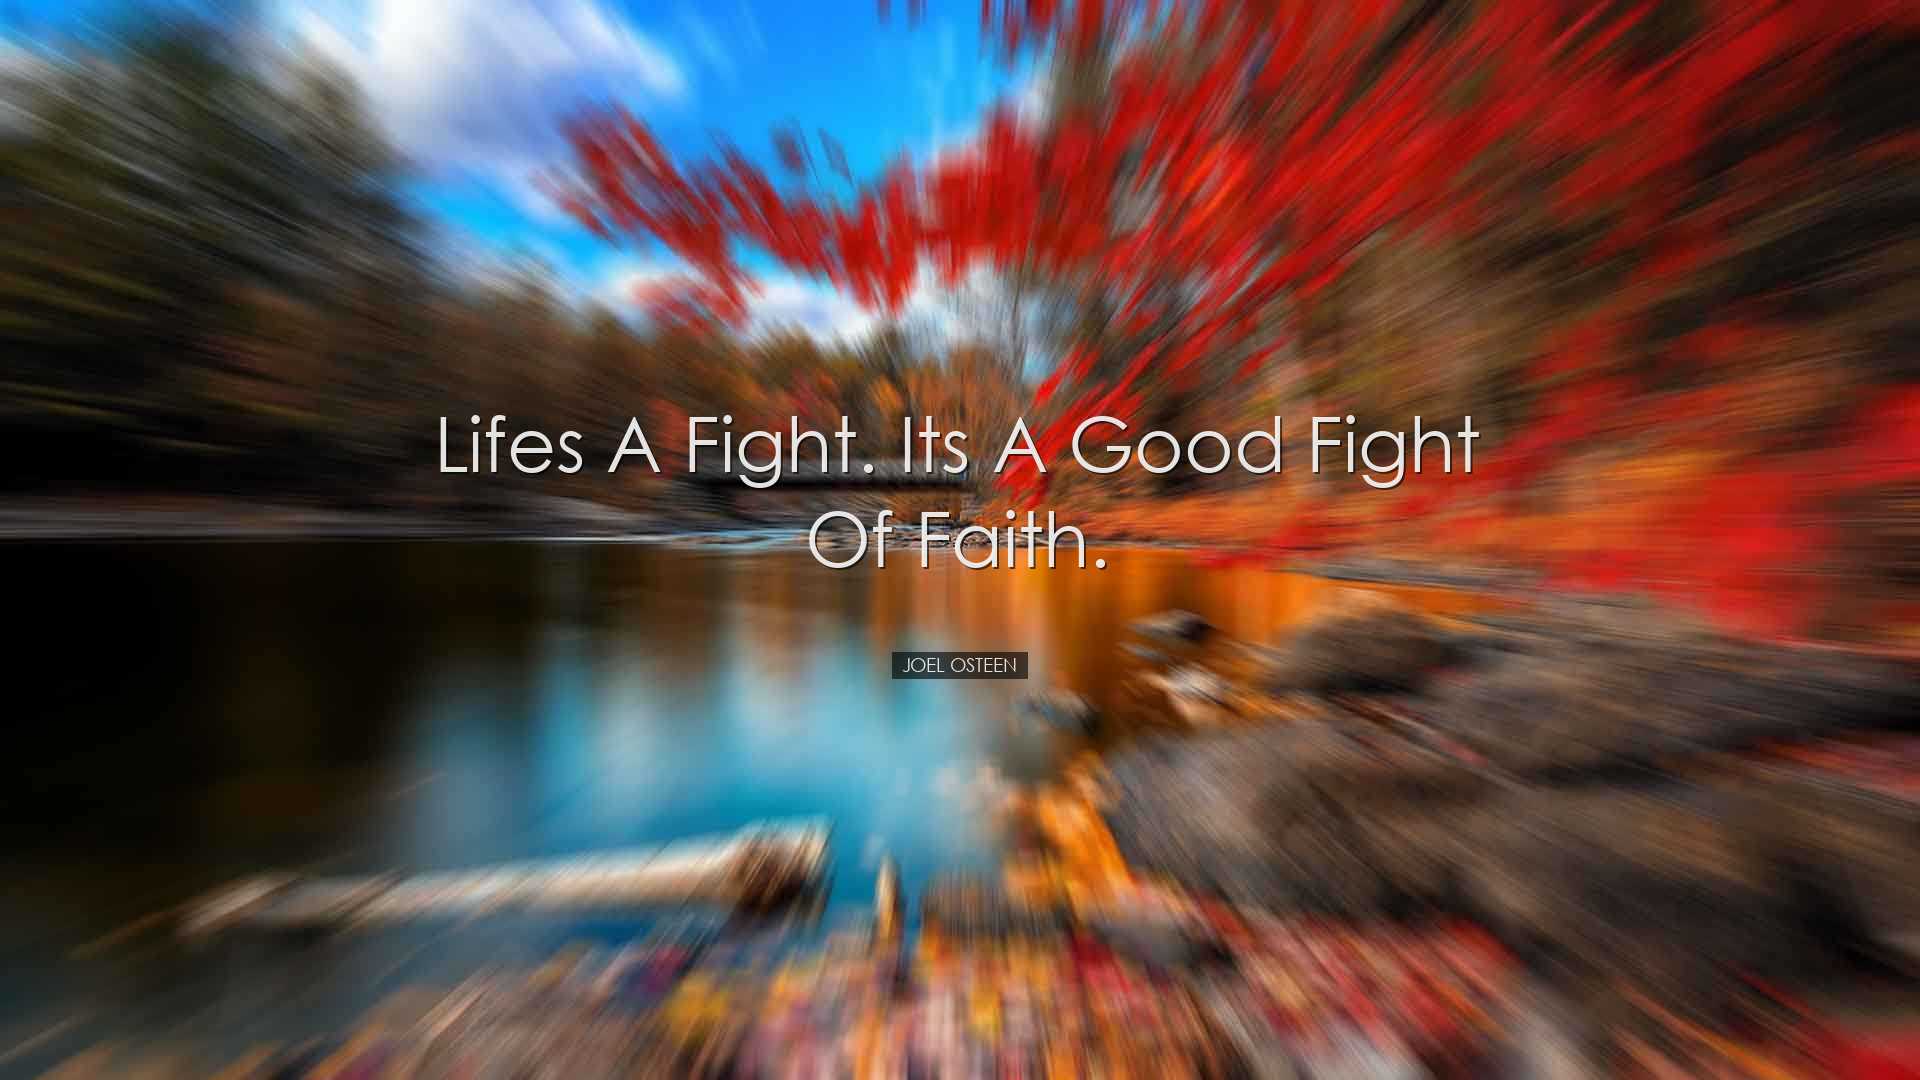 Lifes a fight. Its a good fight of faith. - Joel Osteen